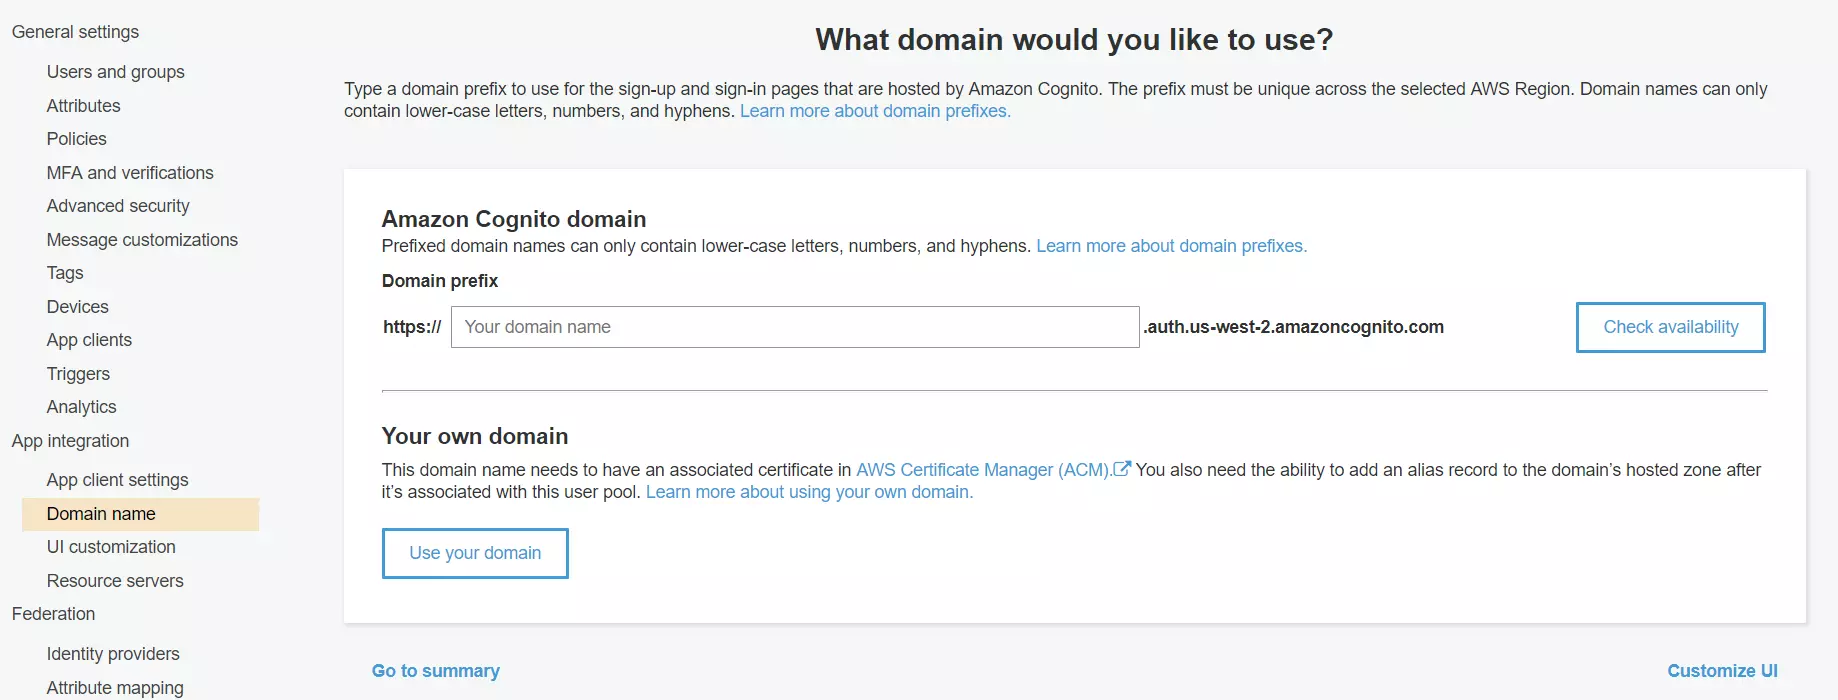 OAuth/OpenID/OIDC Single Sign-On (SSO) -  AWS cognito SSO Login domain name